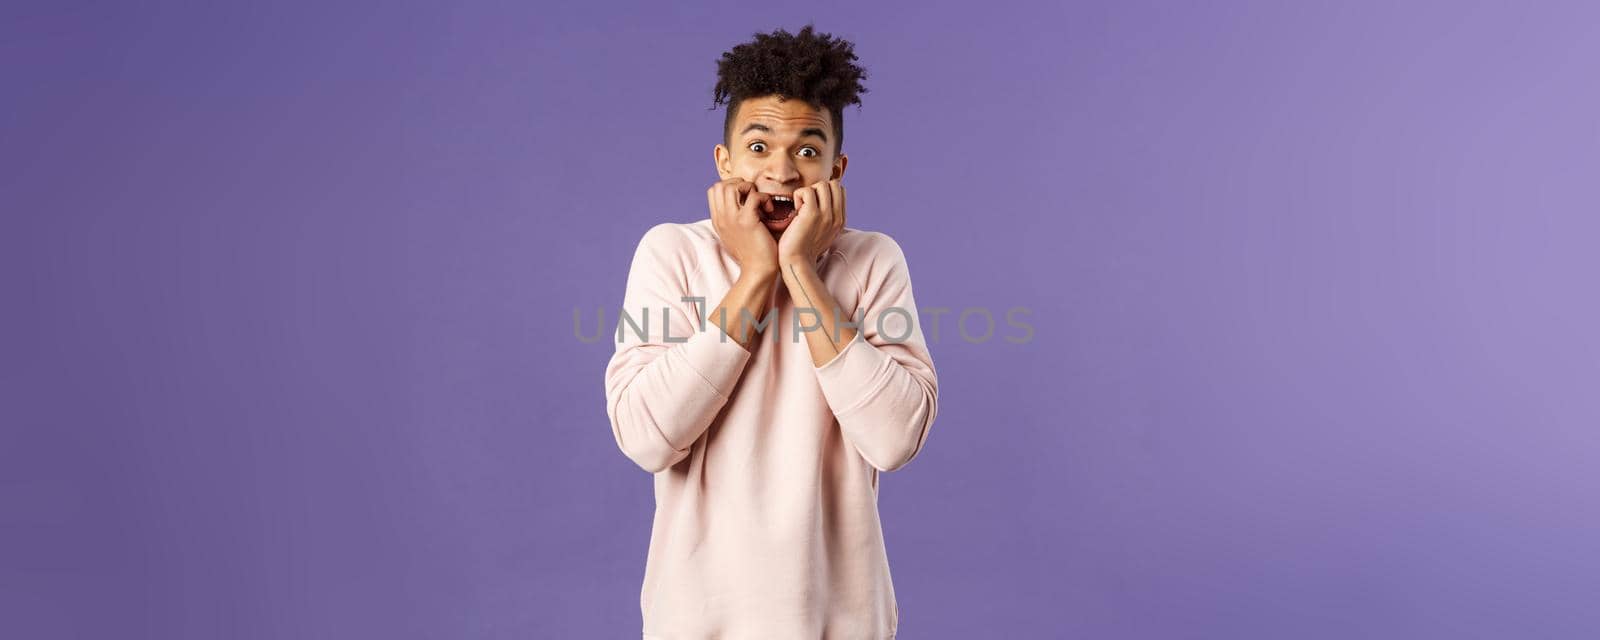 Portrait of young scared guy watching really scary movie, horror alone, gasping screaming and hold hands pressed to face, look terrified, trembling from fear, standing purple background.